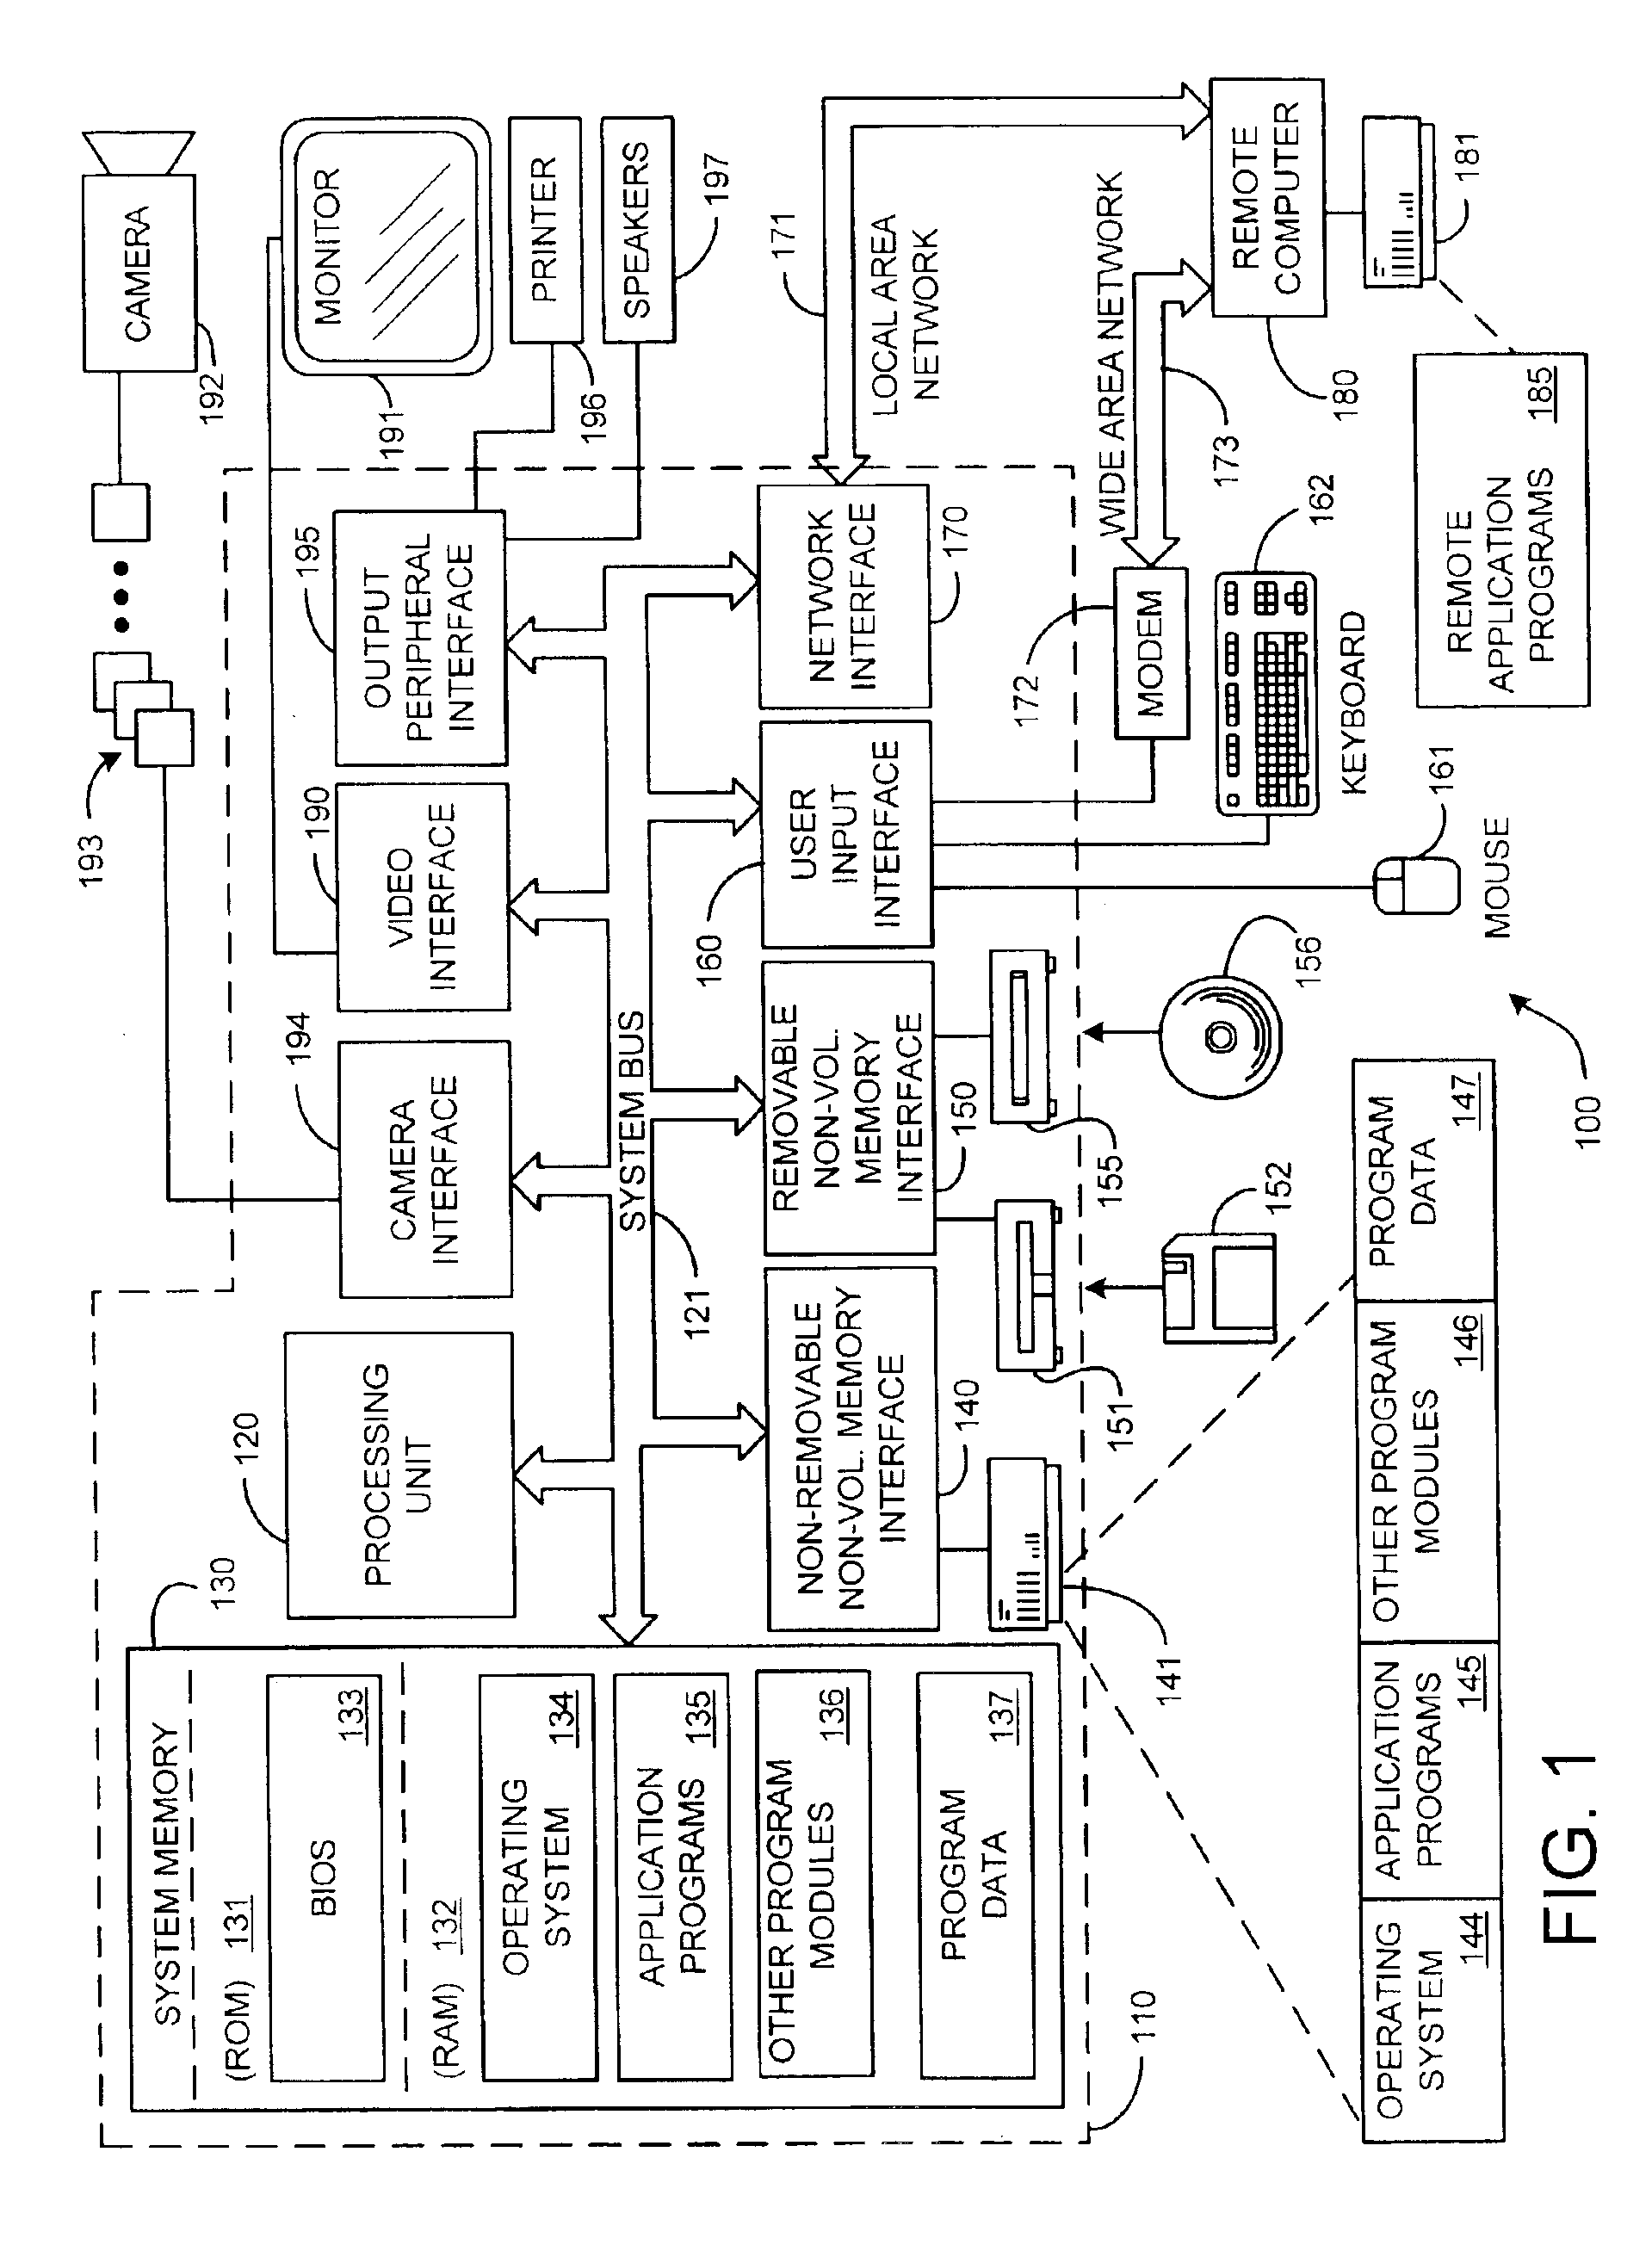 System and process for generating high dynamic range video